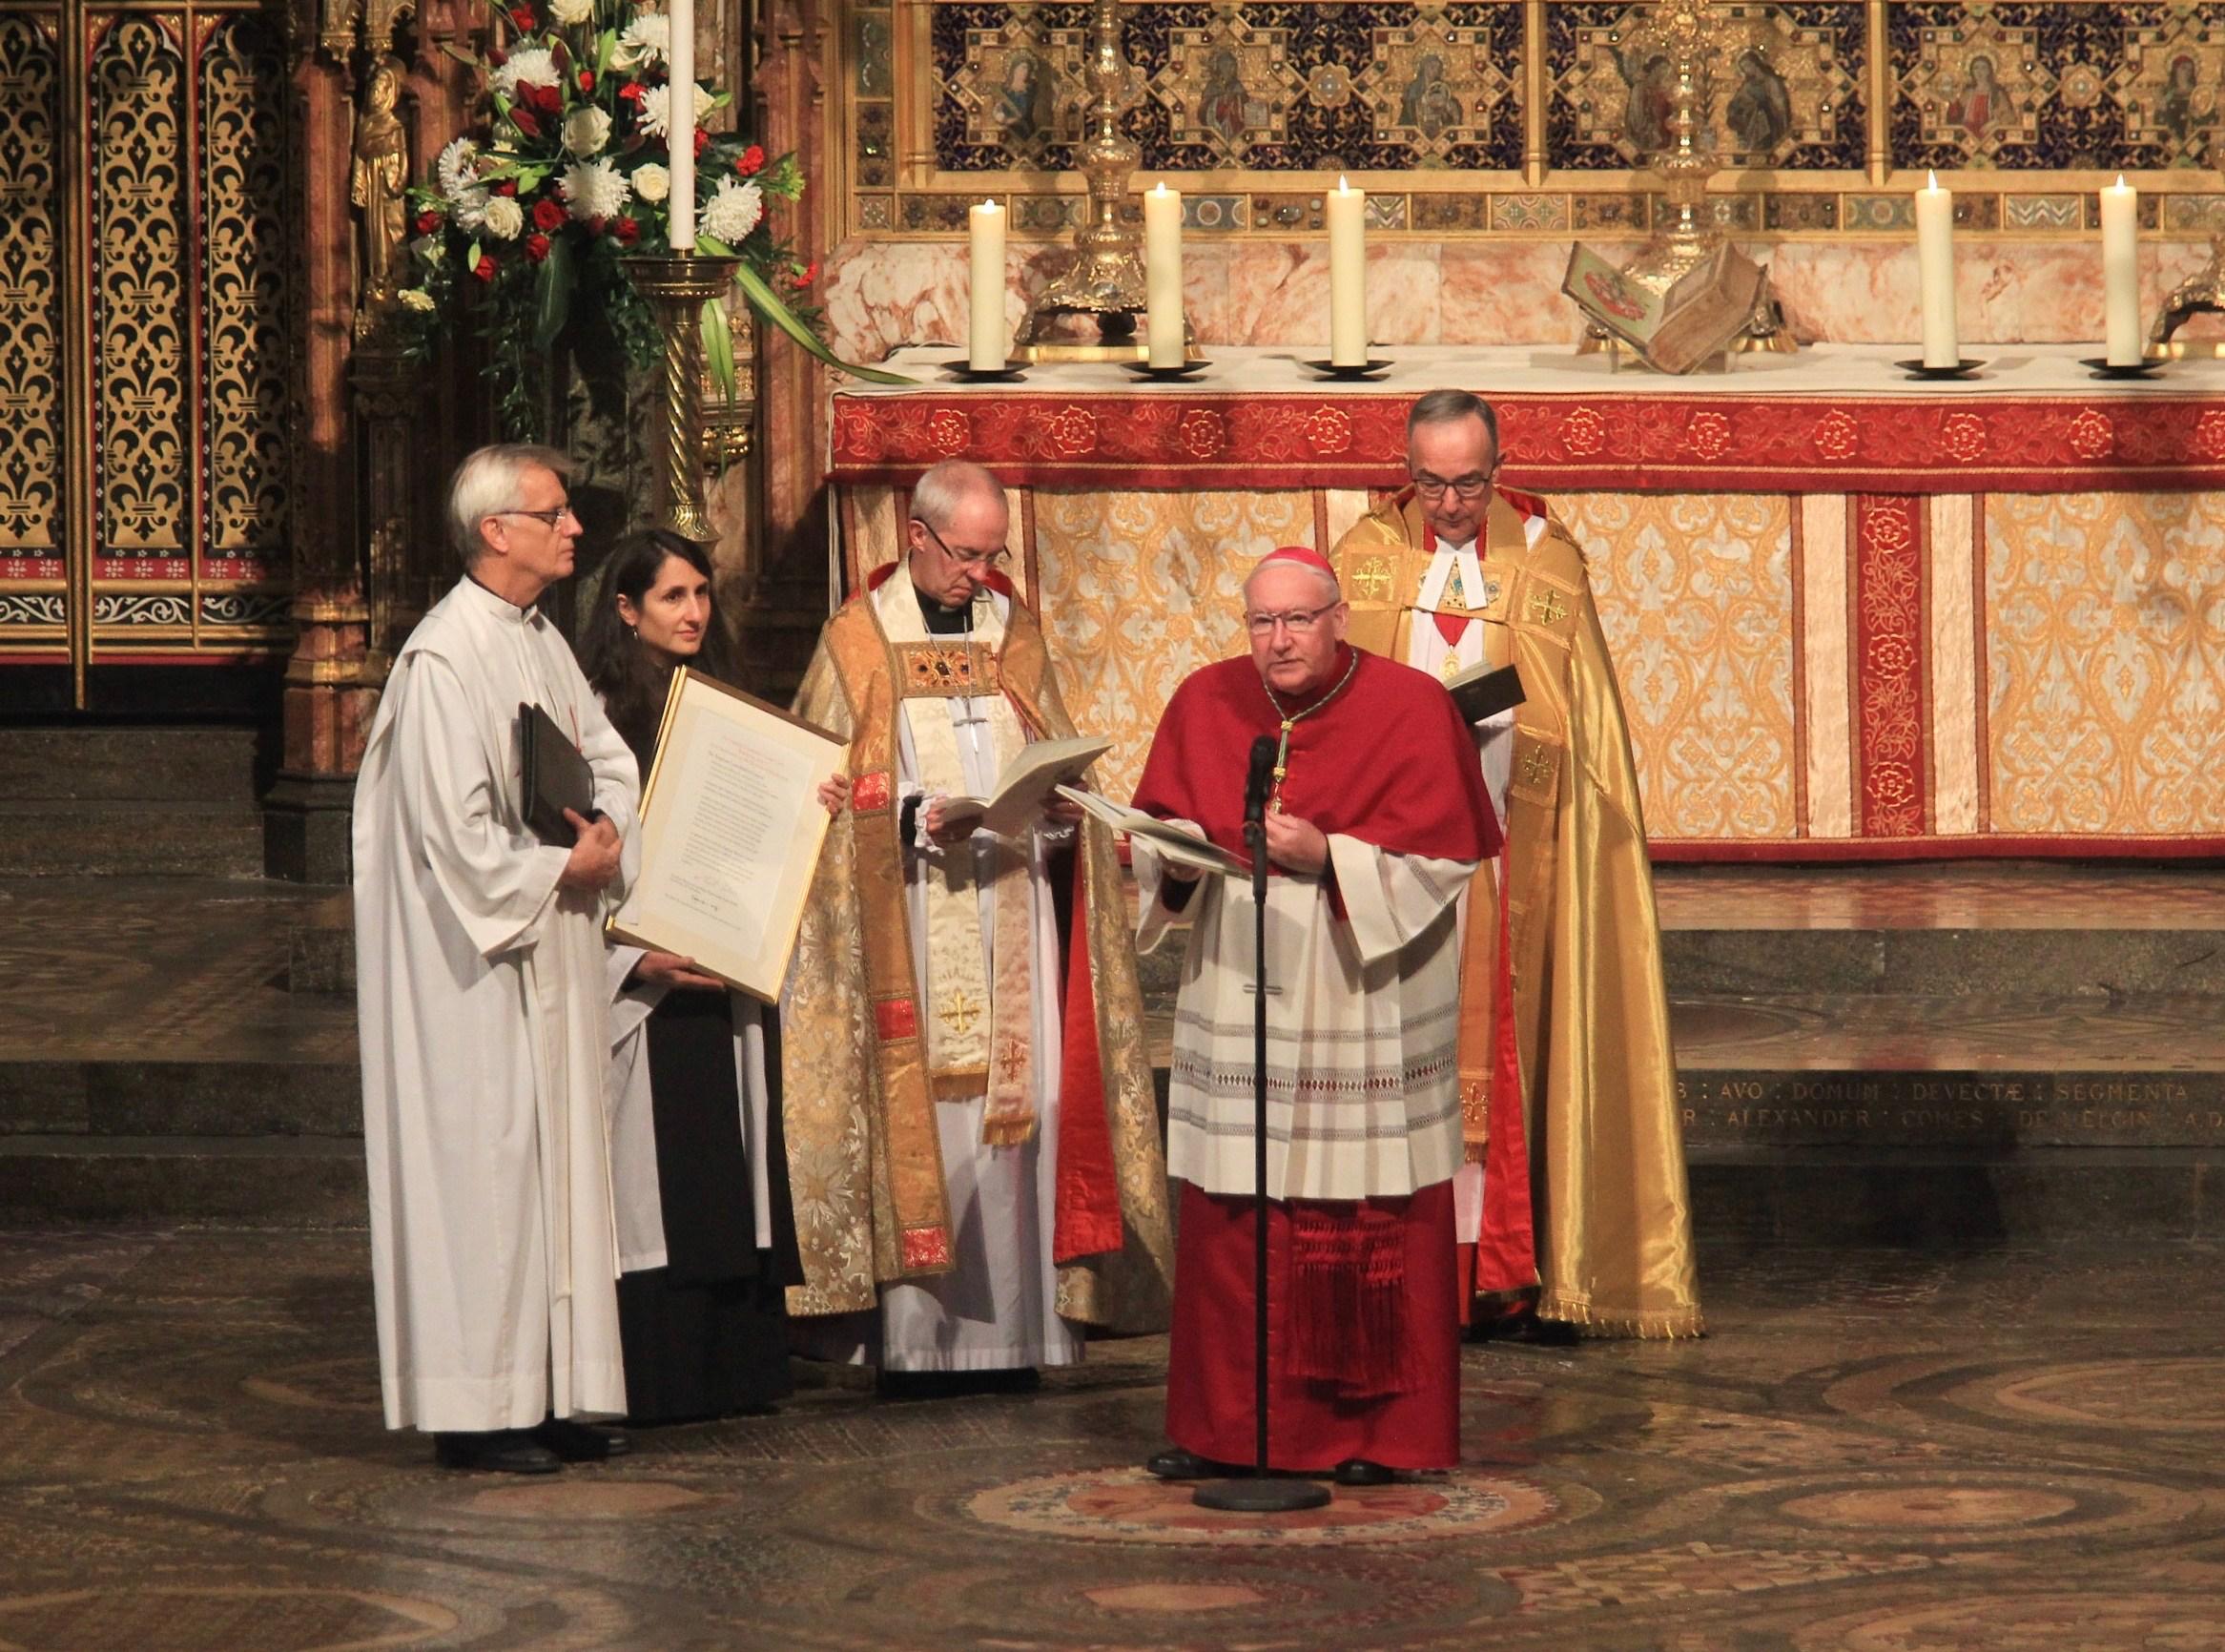 A service to mark the 500th anniversary of the Reformation was held at Westminster Abbey, London. From left: the LWF General Secretary Rev. Dr Martin Junge, the Reverend Isabelle Hamley, the Archbishop of Canterbury Justin Welby, the PCPCU Secretary Bishop Dr. Brian Farrell, the Dean of Westminster Rev. Dr John Hall. Photo: Andrew Dunsmore/Westminster Abbey